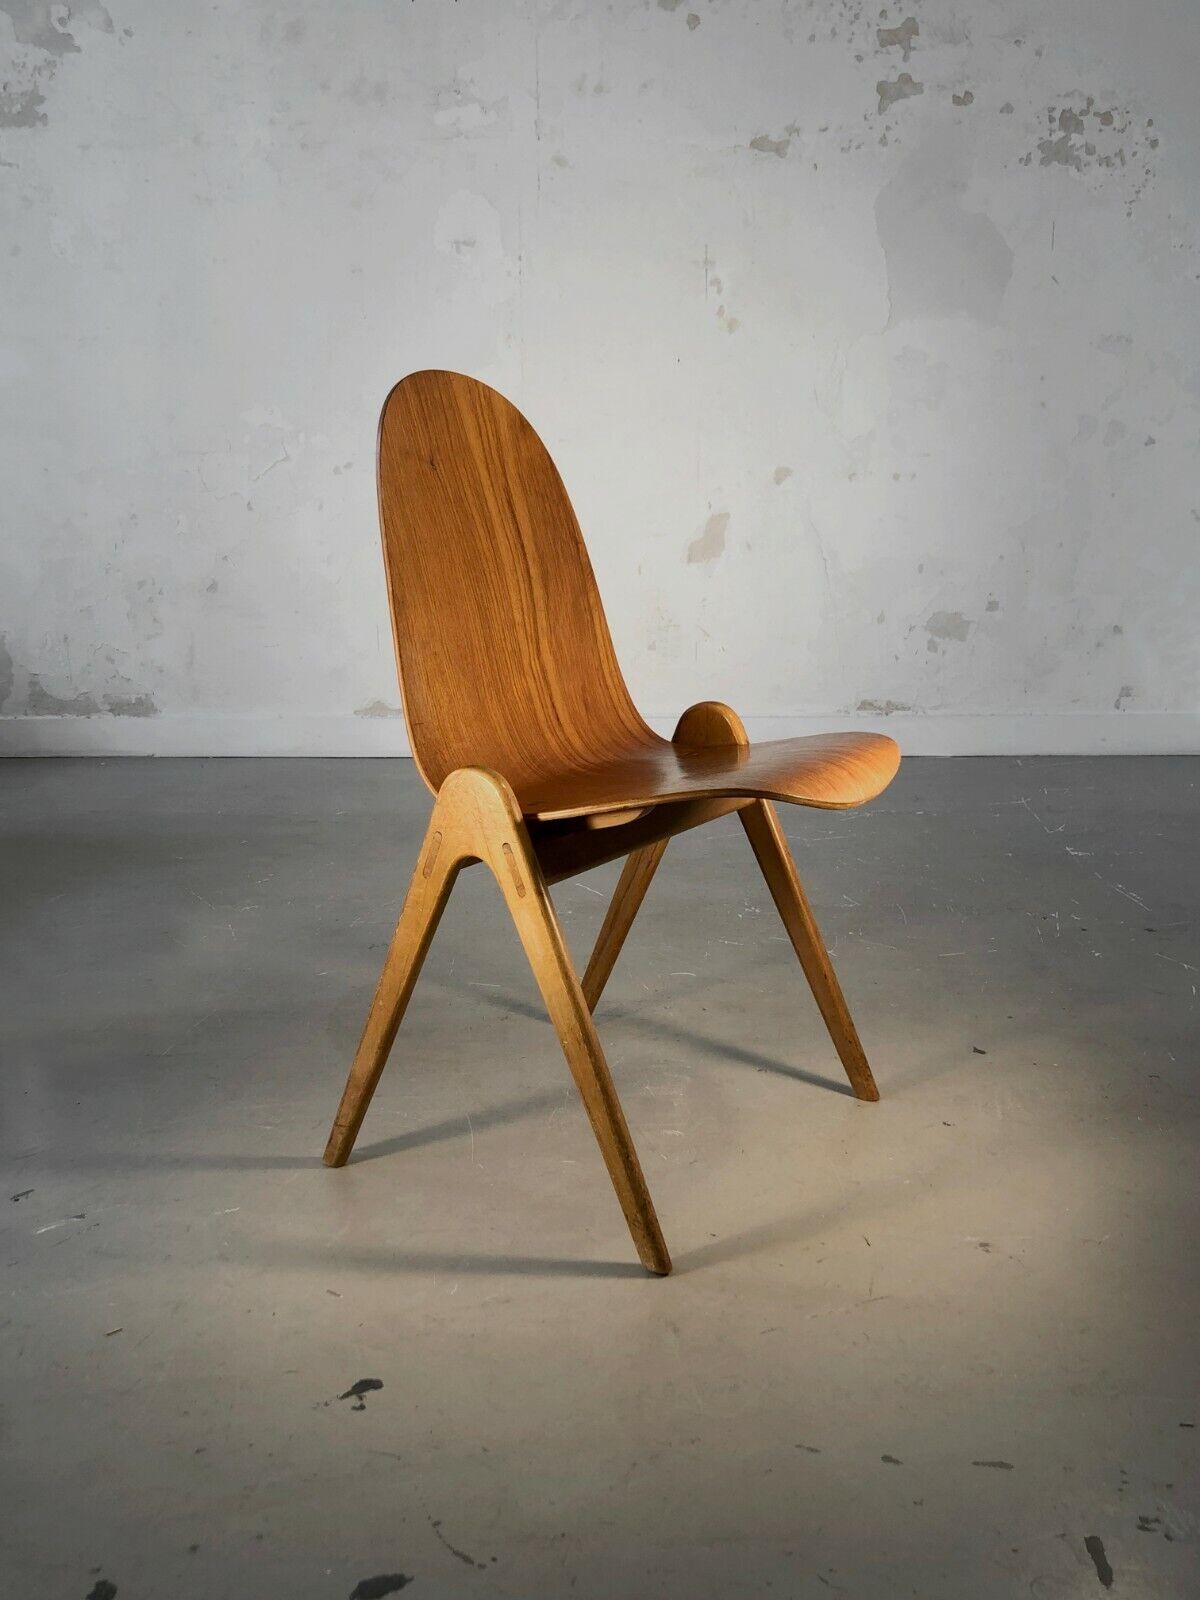 An amazing chair with compass feet and a Plywood back, Modernist, Forme Libre, Dansk, Scandinave, compass feet in birch wood, the seat in plywood held by two superb bronze nuts and bolts, model called 